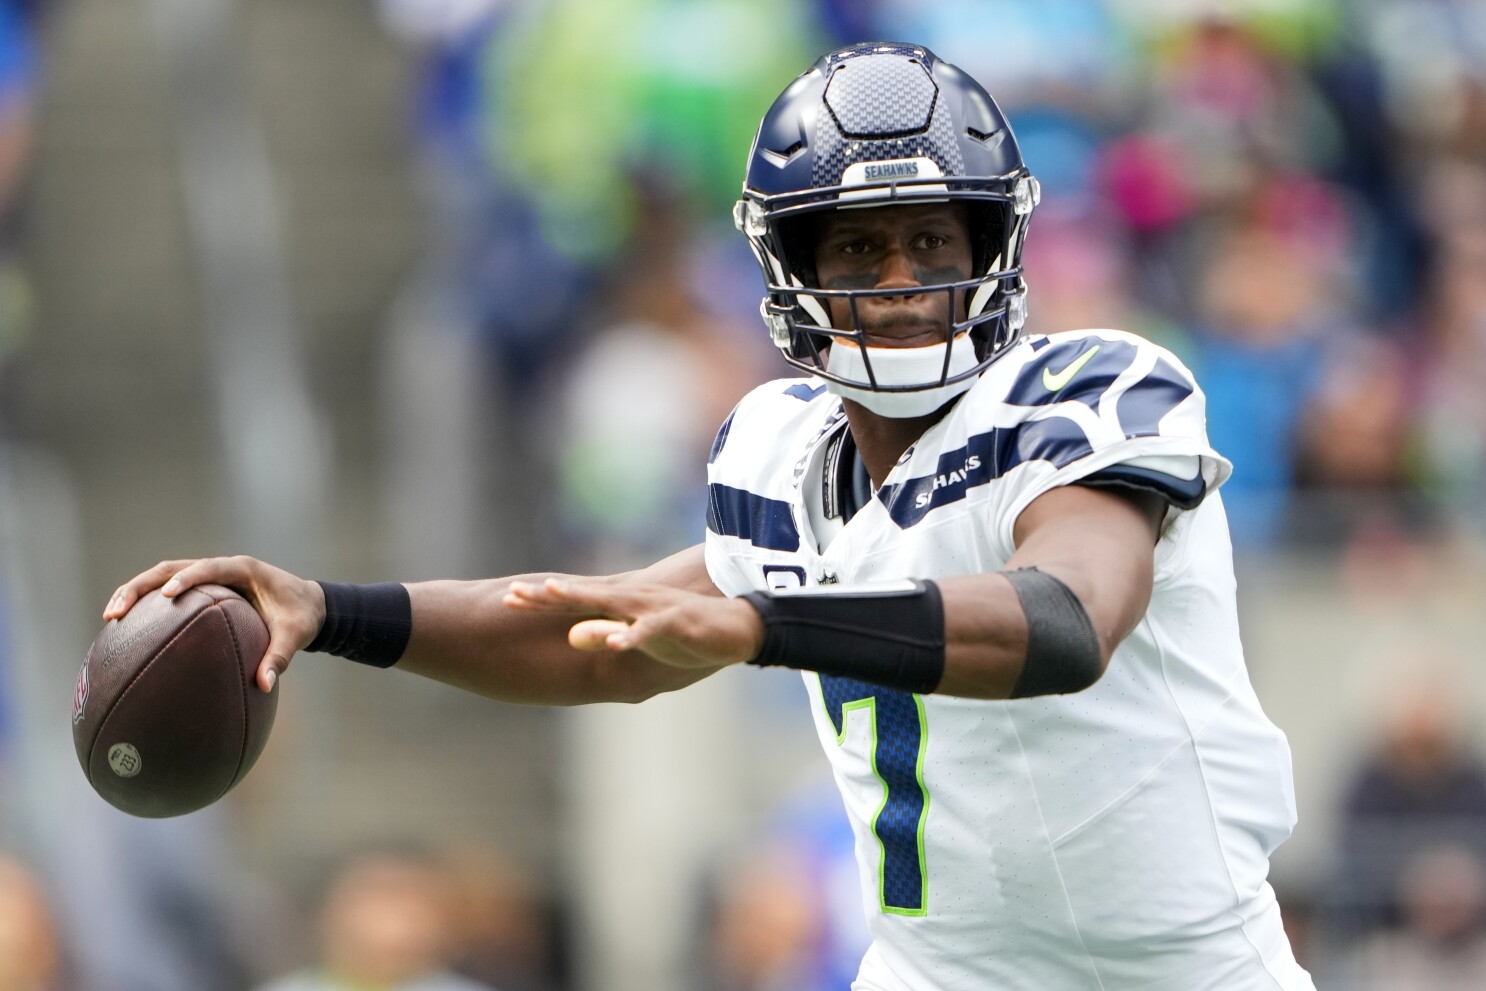 The Seahawks will try to remain perfect at MetLife Stadium when they face  the Giants on Monday night